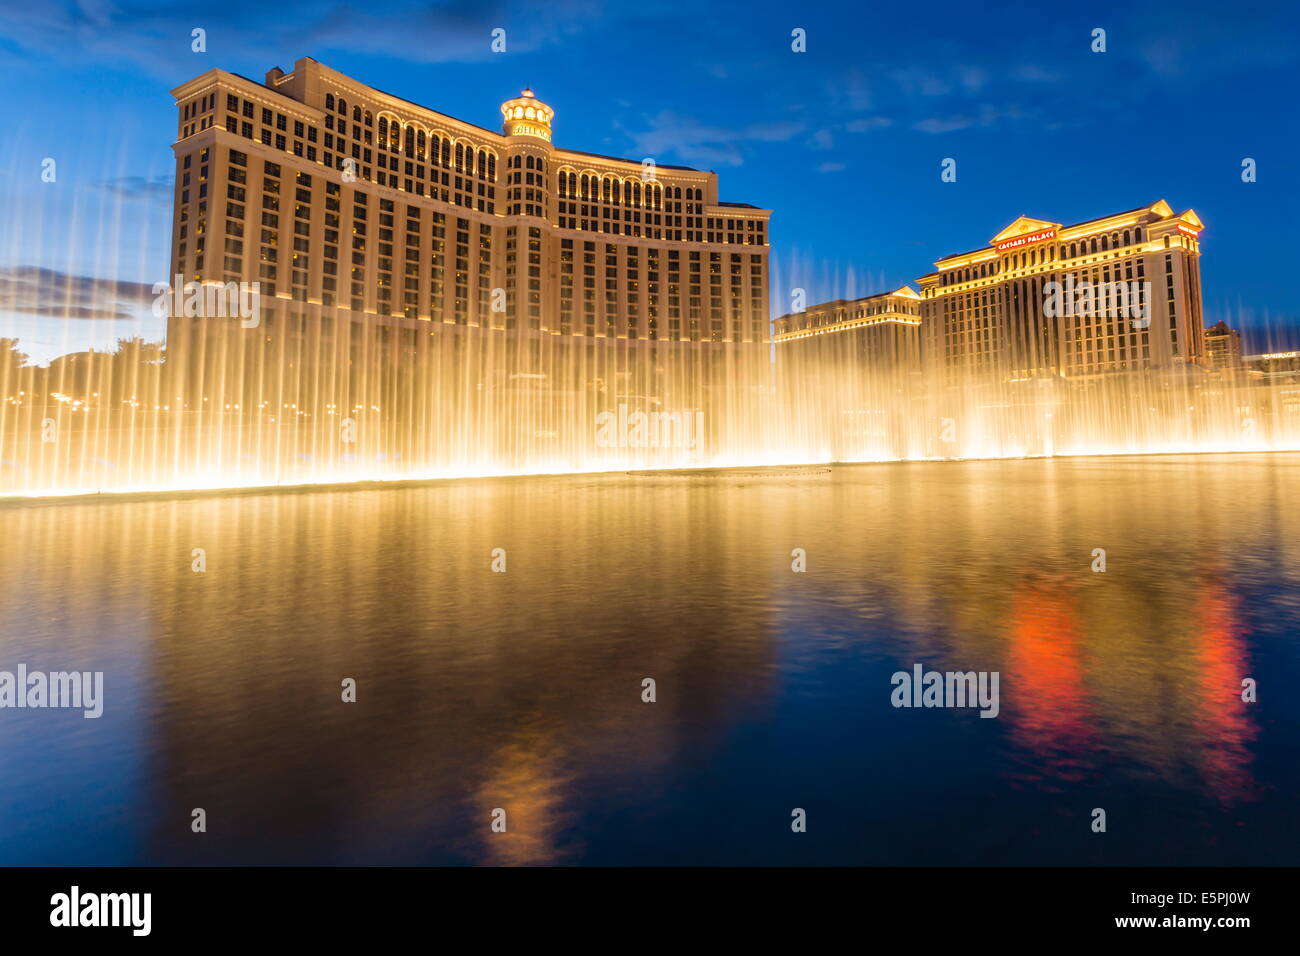 Bellagio and Caesars Palace reflections at dusk with fountains, The Strip, Las Vegas, Nevada, United States of America Stock Photo